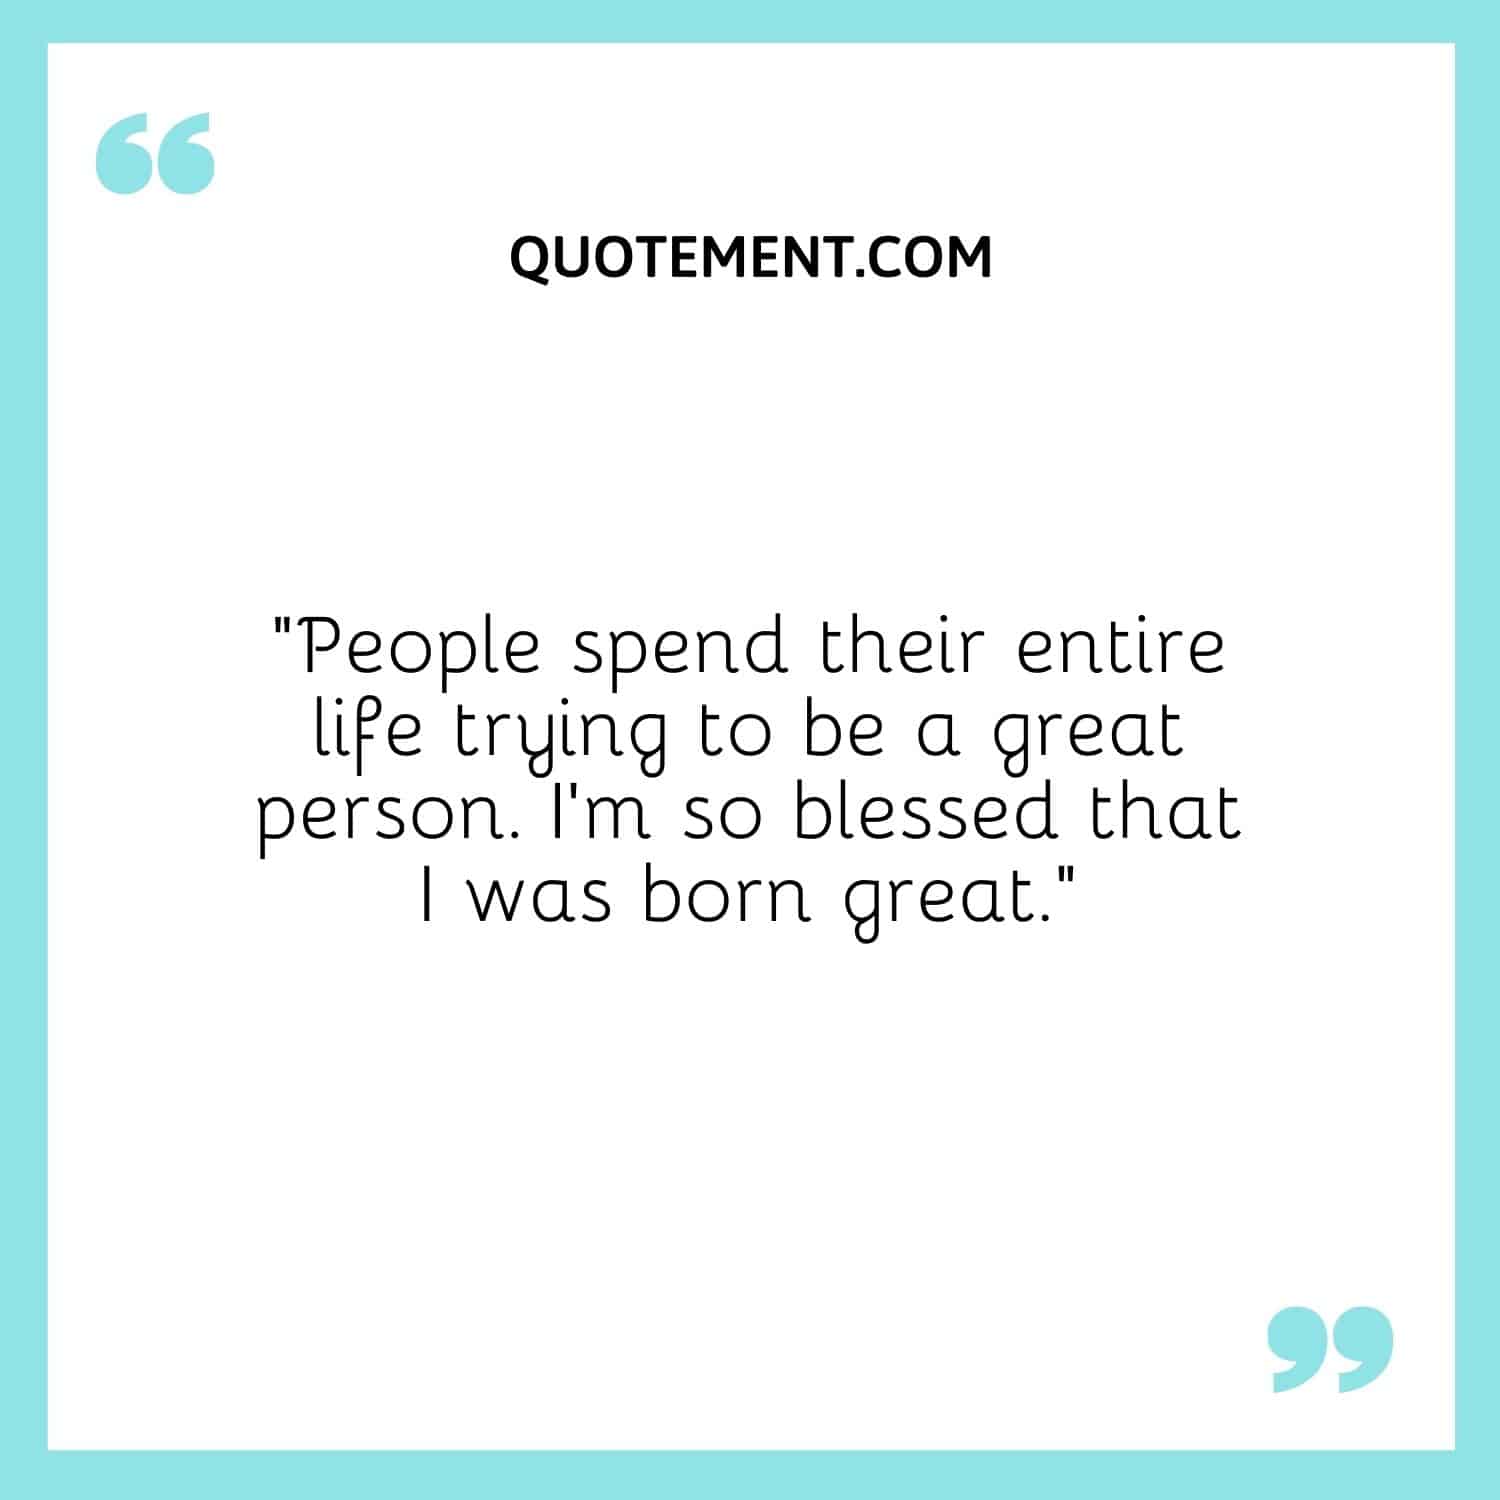 “People spend their entire life trying to be a great person. I’m so blessed that I was born great.”